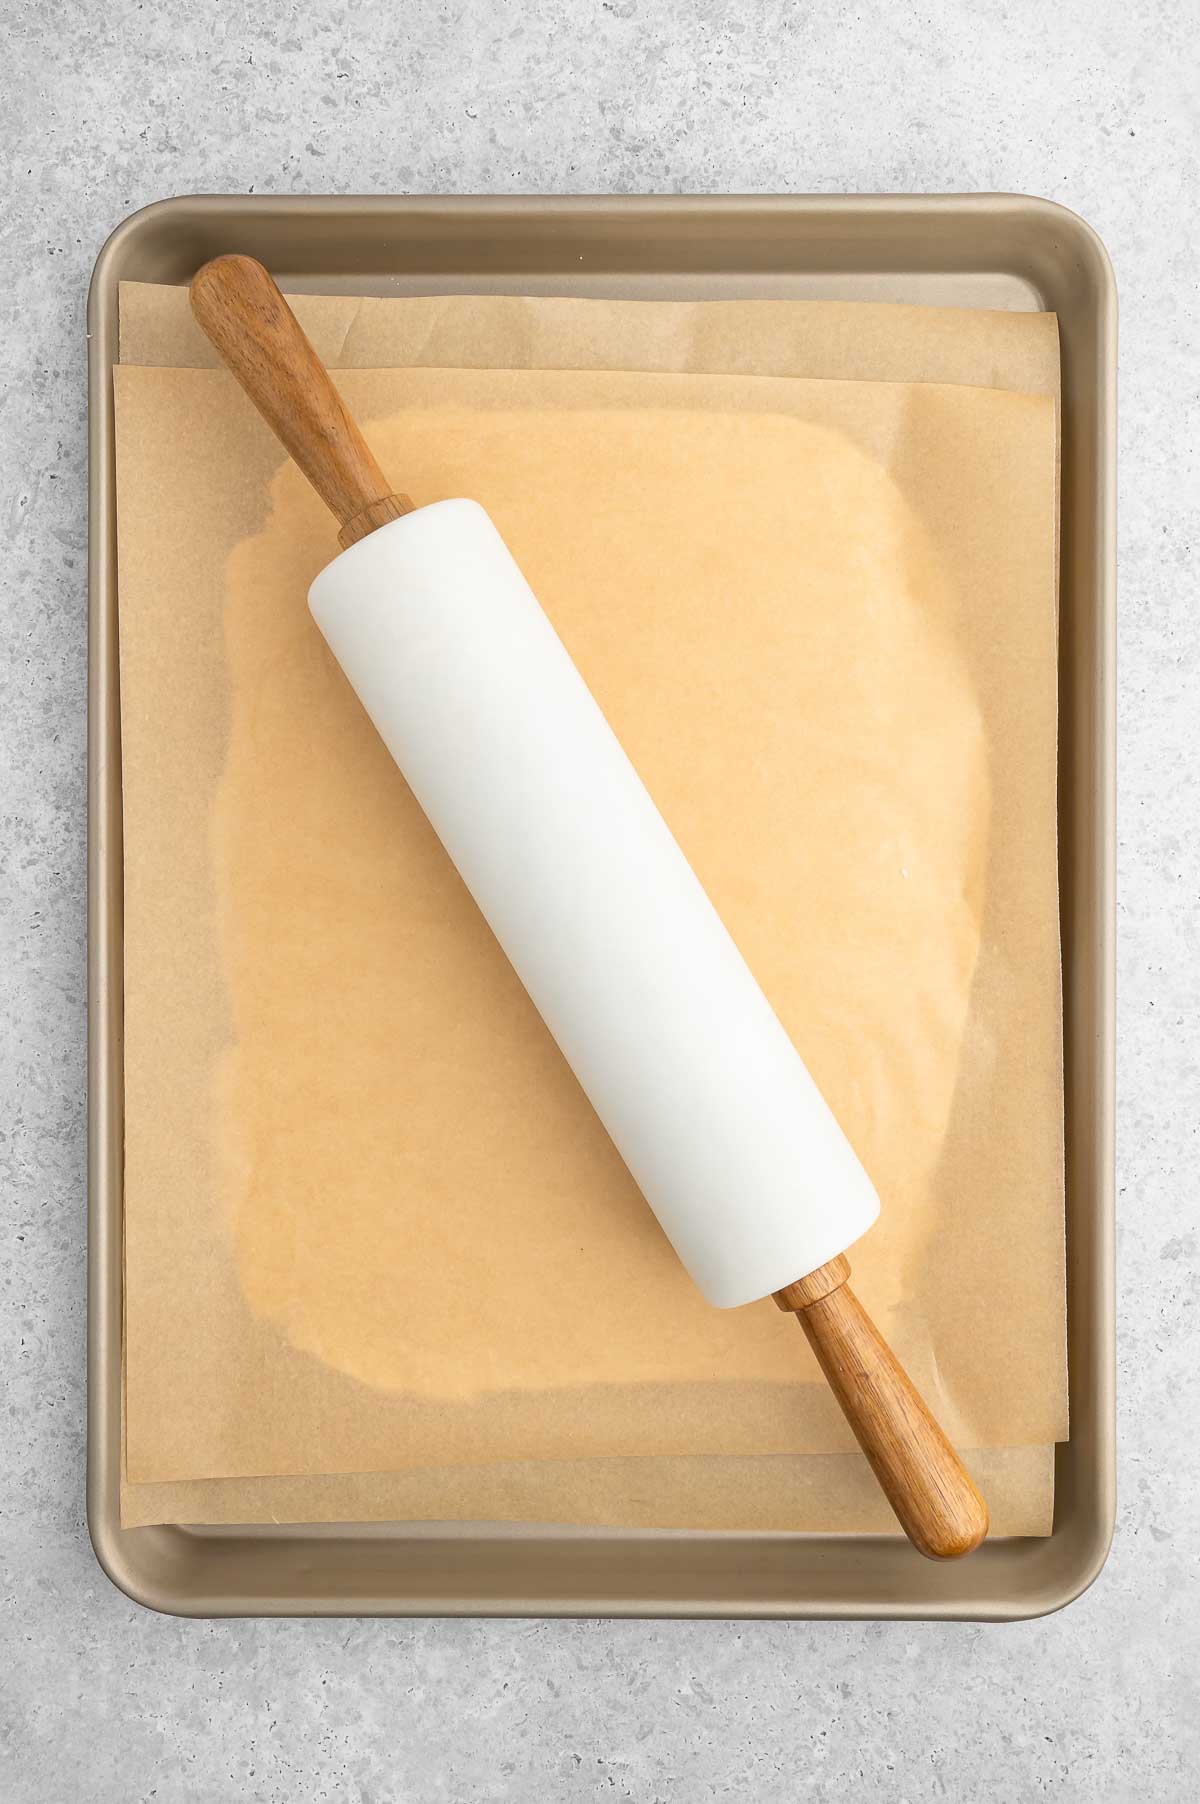 A rolling pin flattening out the pot pie crust that's between two sheets of parchment paper.